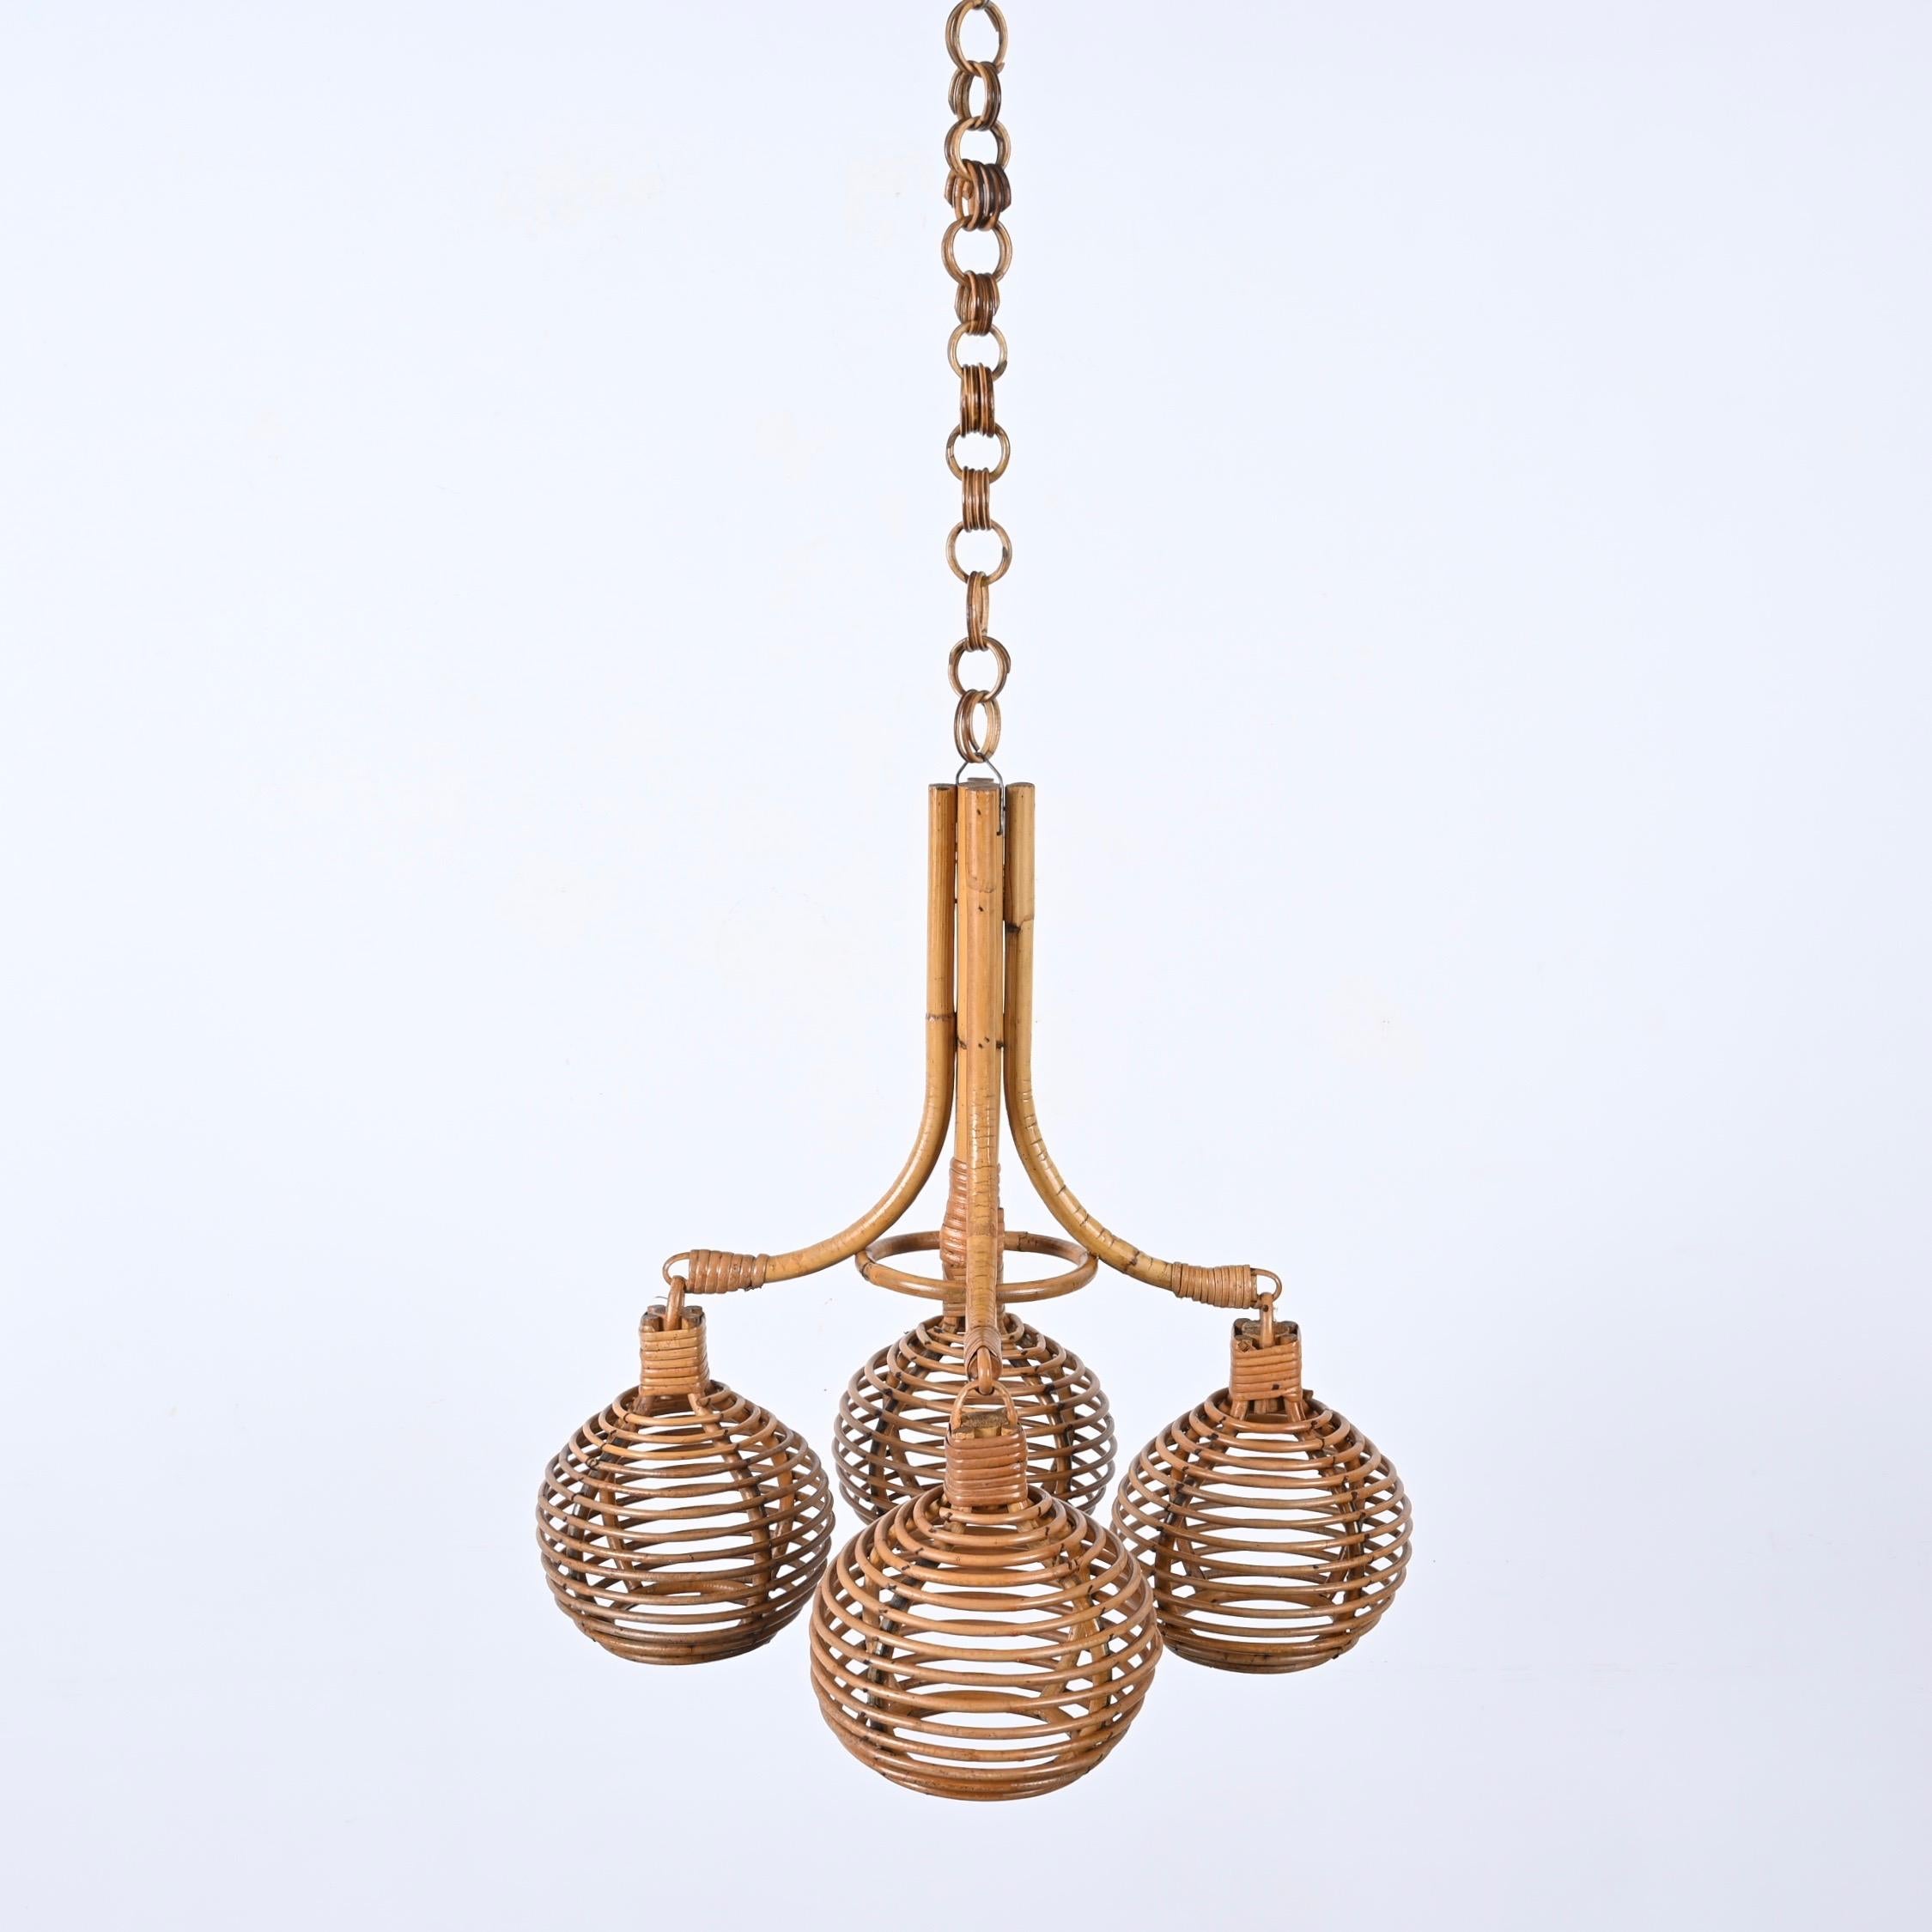 Midcentury French Riviera Bambo and Rattan 4 Sphere Italian Chandelier, 1960s 11